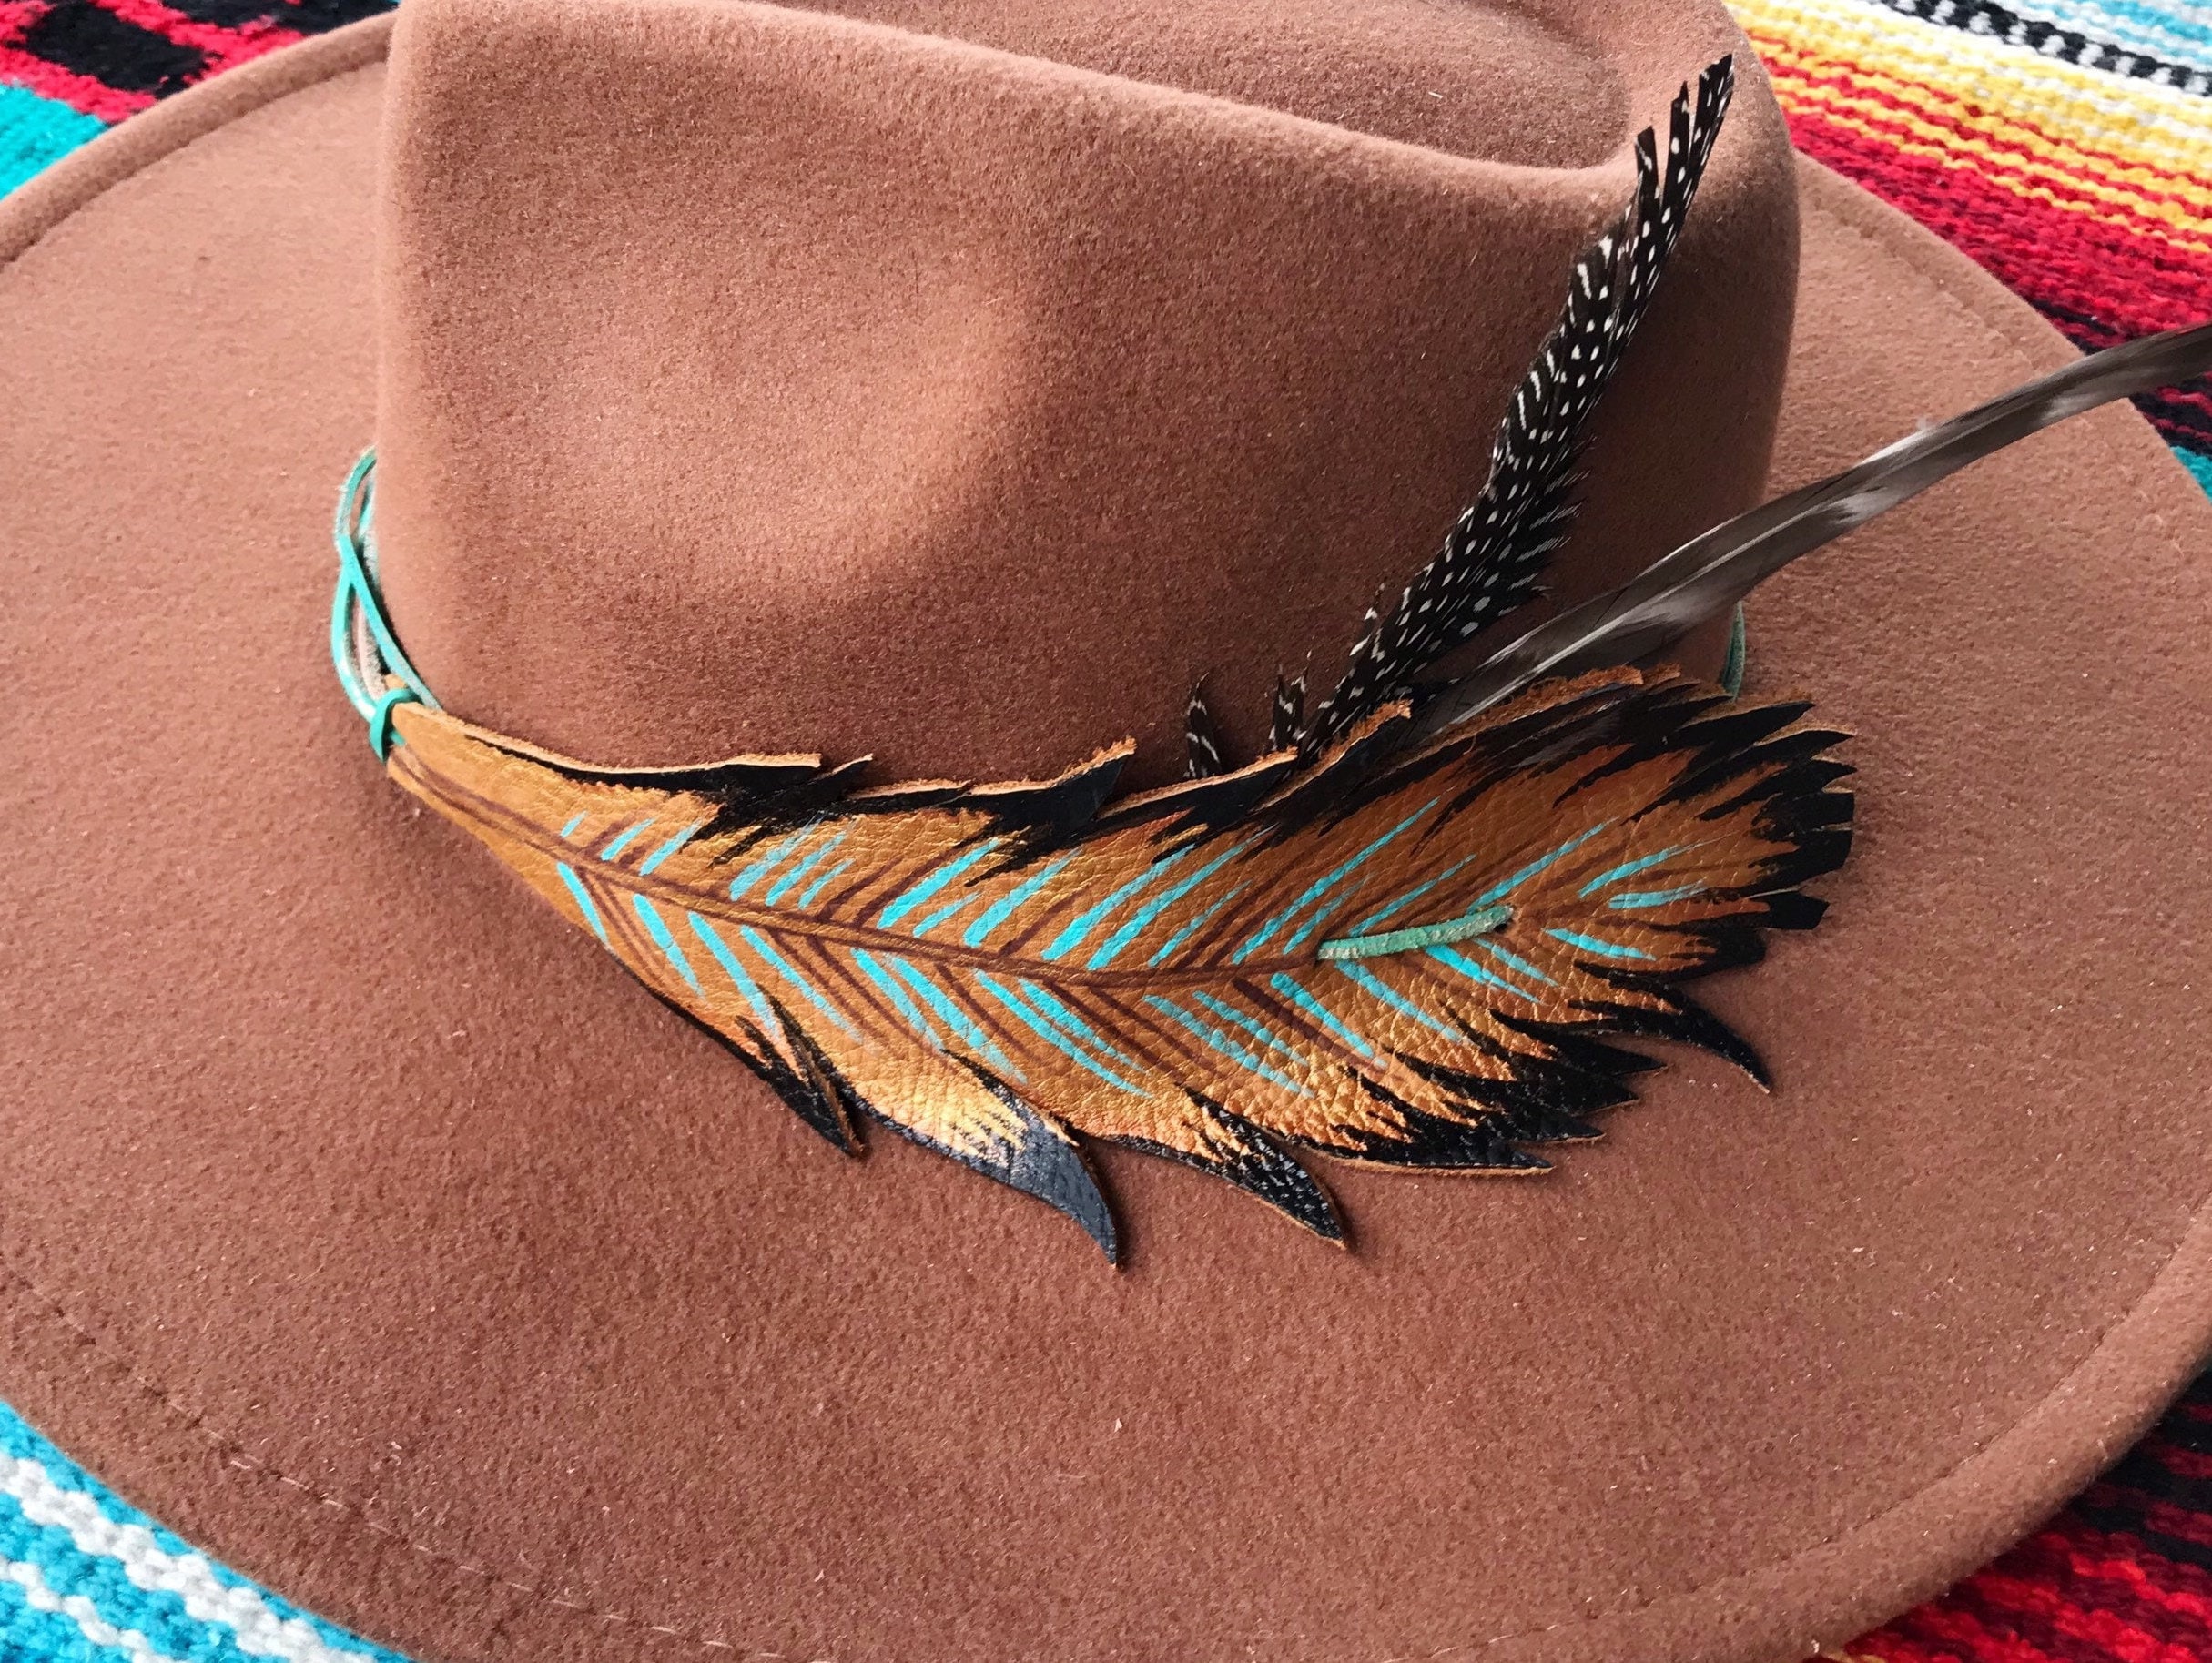 Hat Feathers, 12 Pcs Natural Feathers, Mixed Assorted Cowboy Hats Feathers,  Crafts Feathers for Men Hats, Western Cowboy Hats, Fedoras, DIY